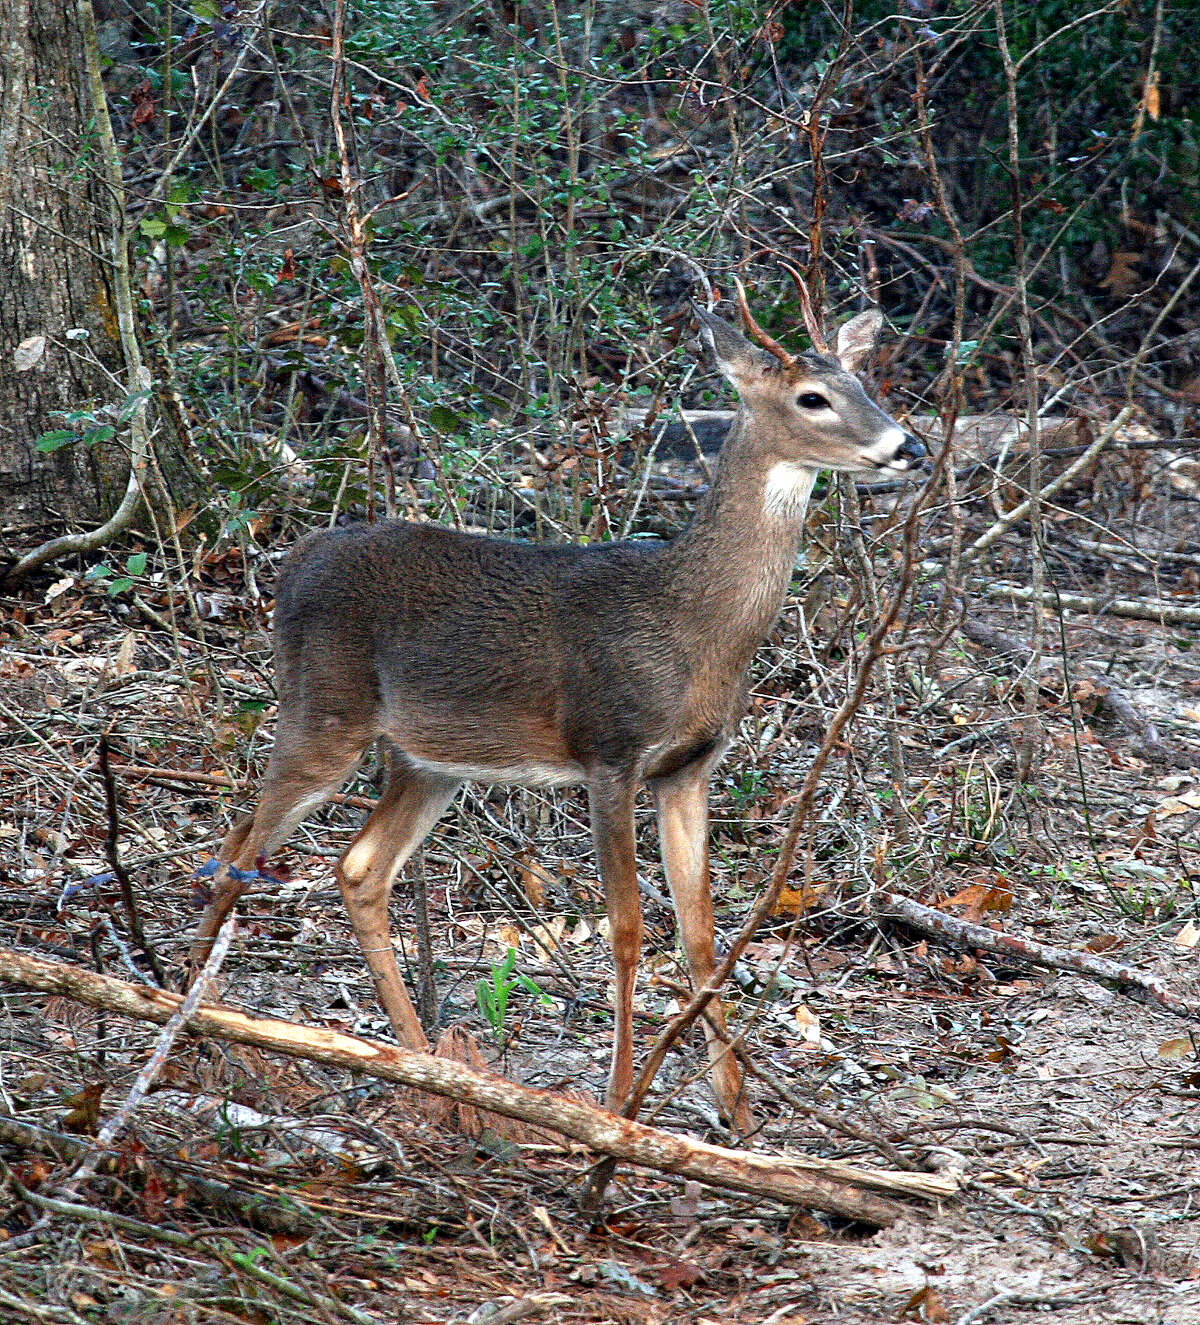 Recently adopted changes in Texas hunting regulations now define "unbranched antlered deer," addressing confusion over rules governing taking of "spike" bucks.